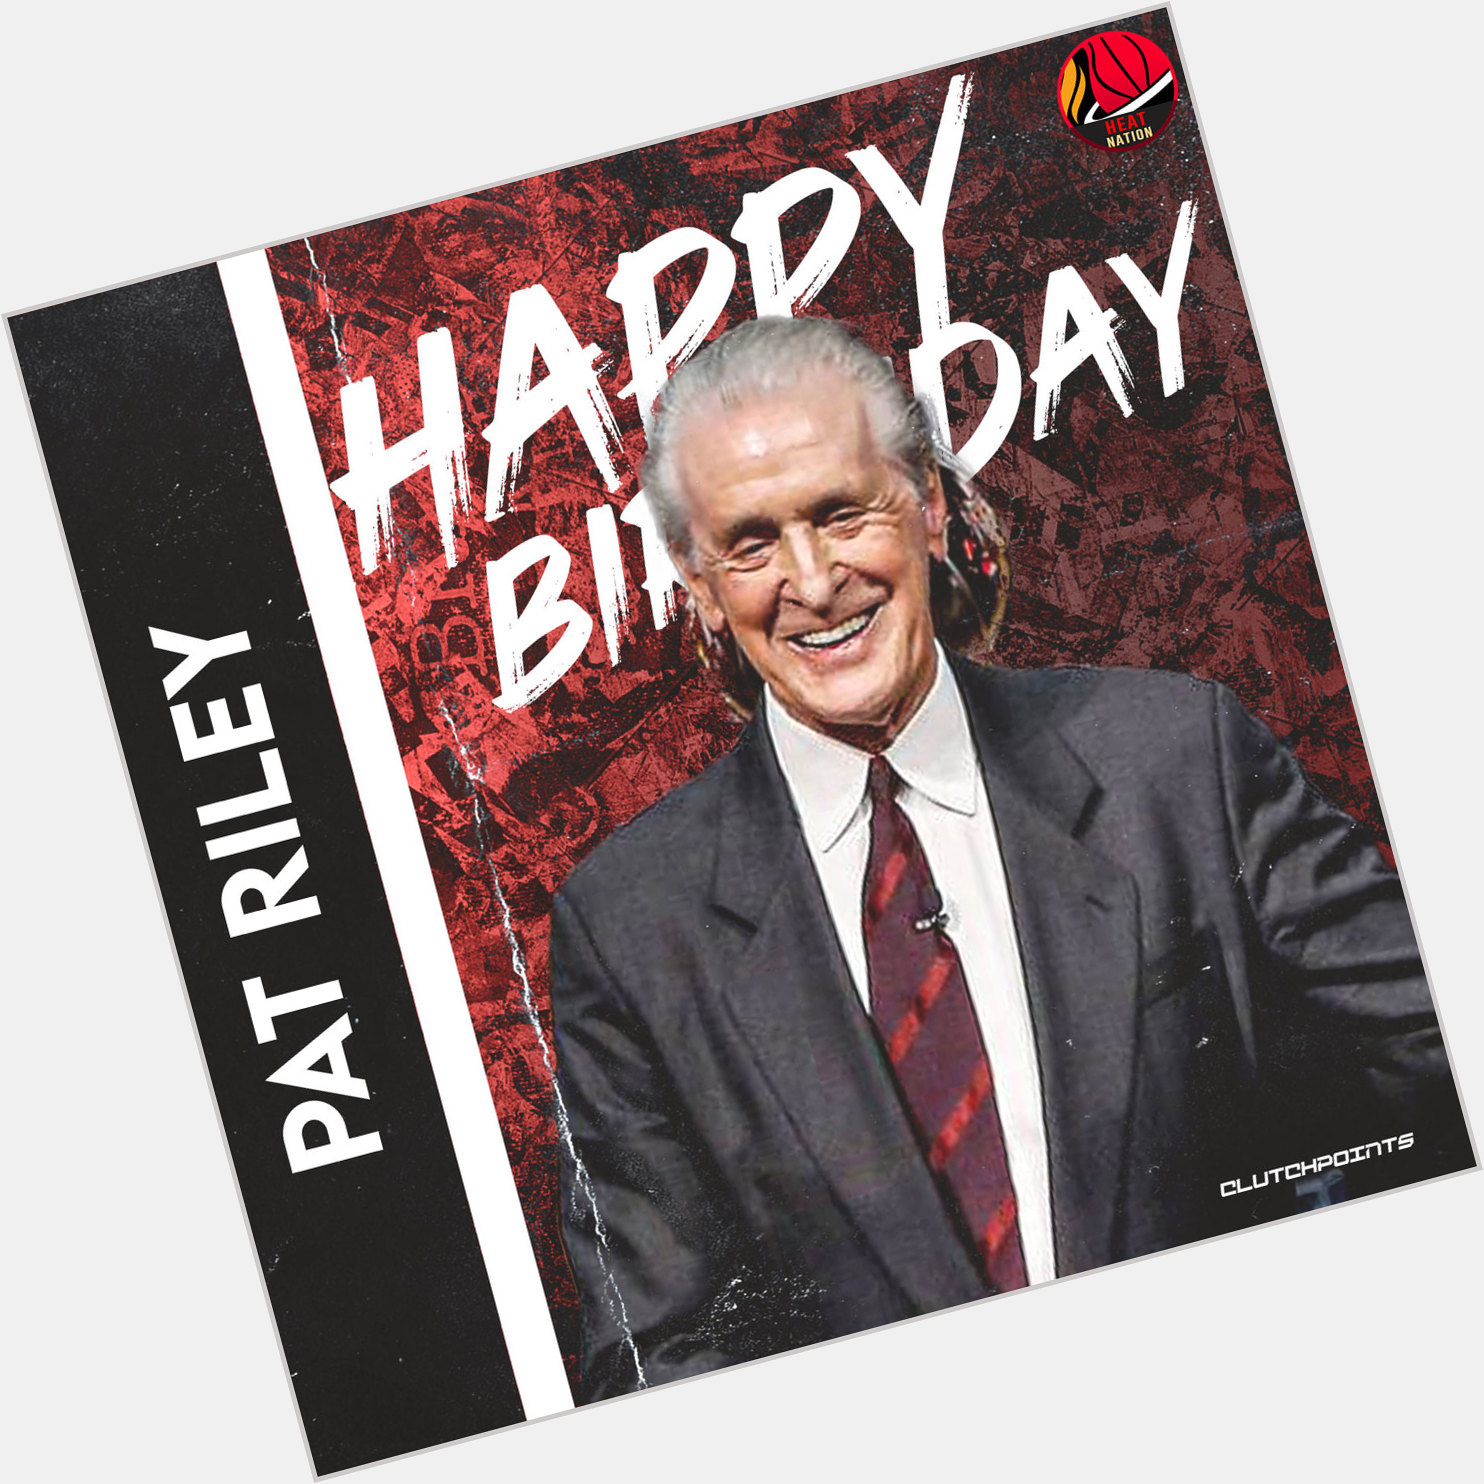 Heat Nation, join us in wishing Pat Riley a happy 77th birthday! 